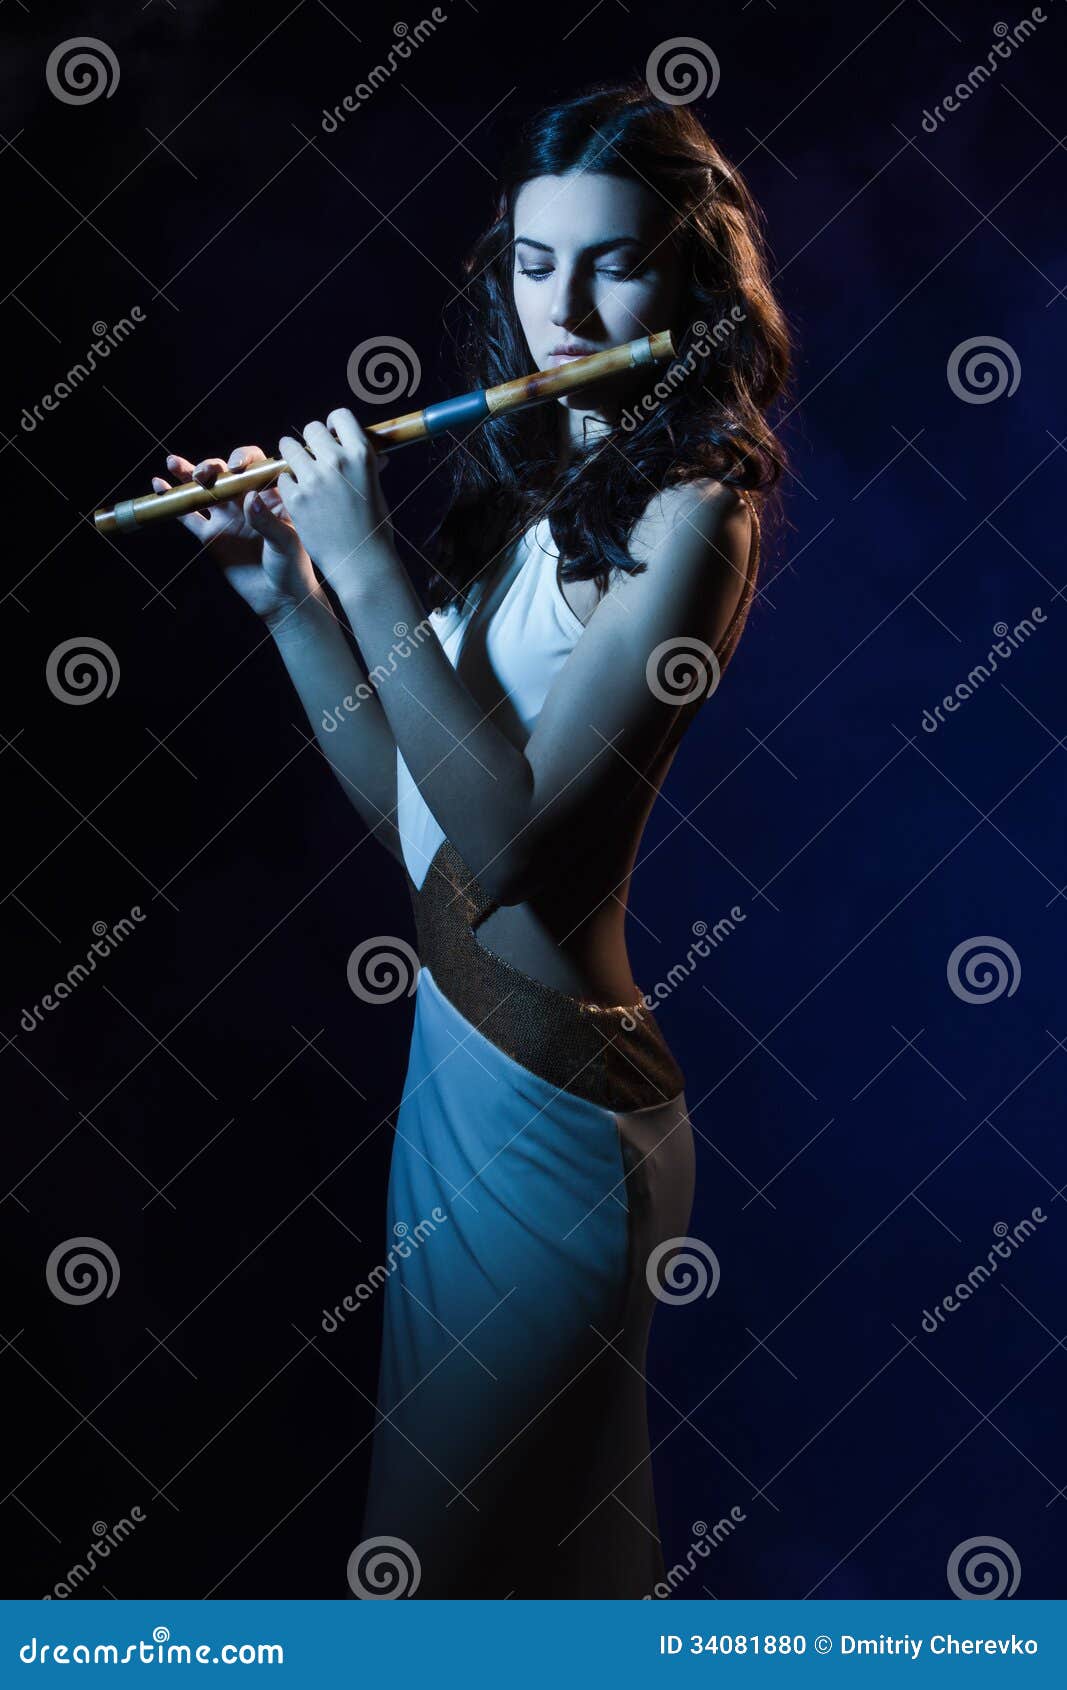 sensuality brunette plays a wooden flute